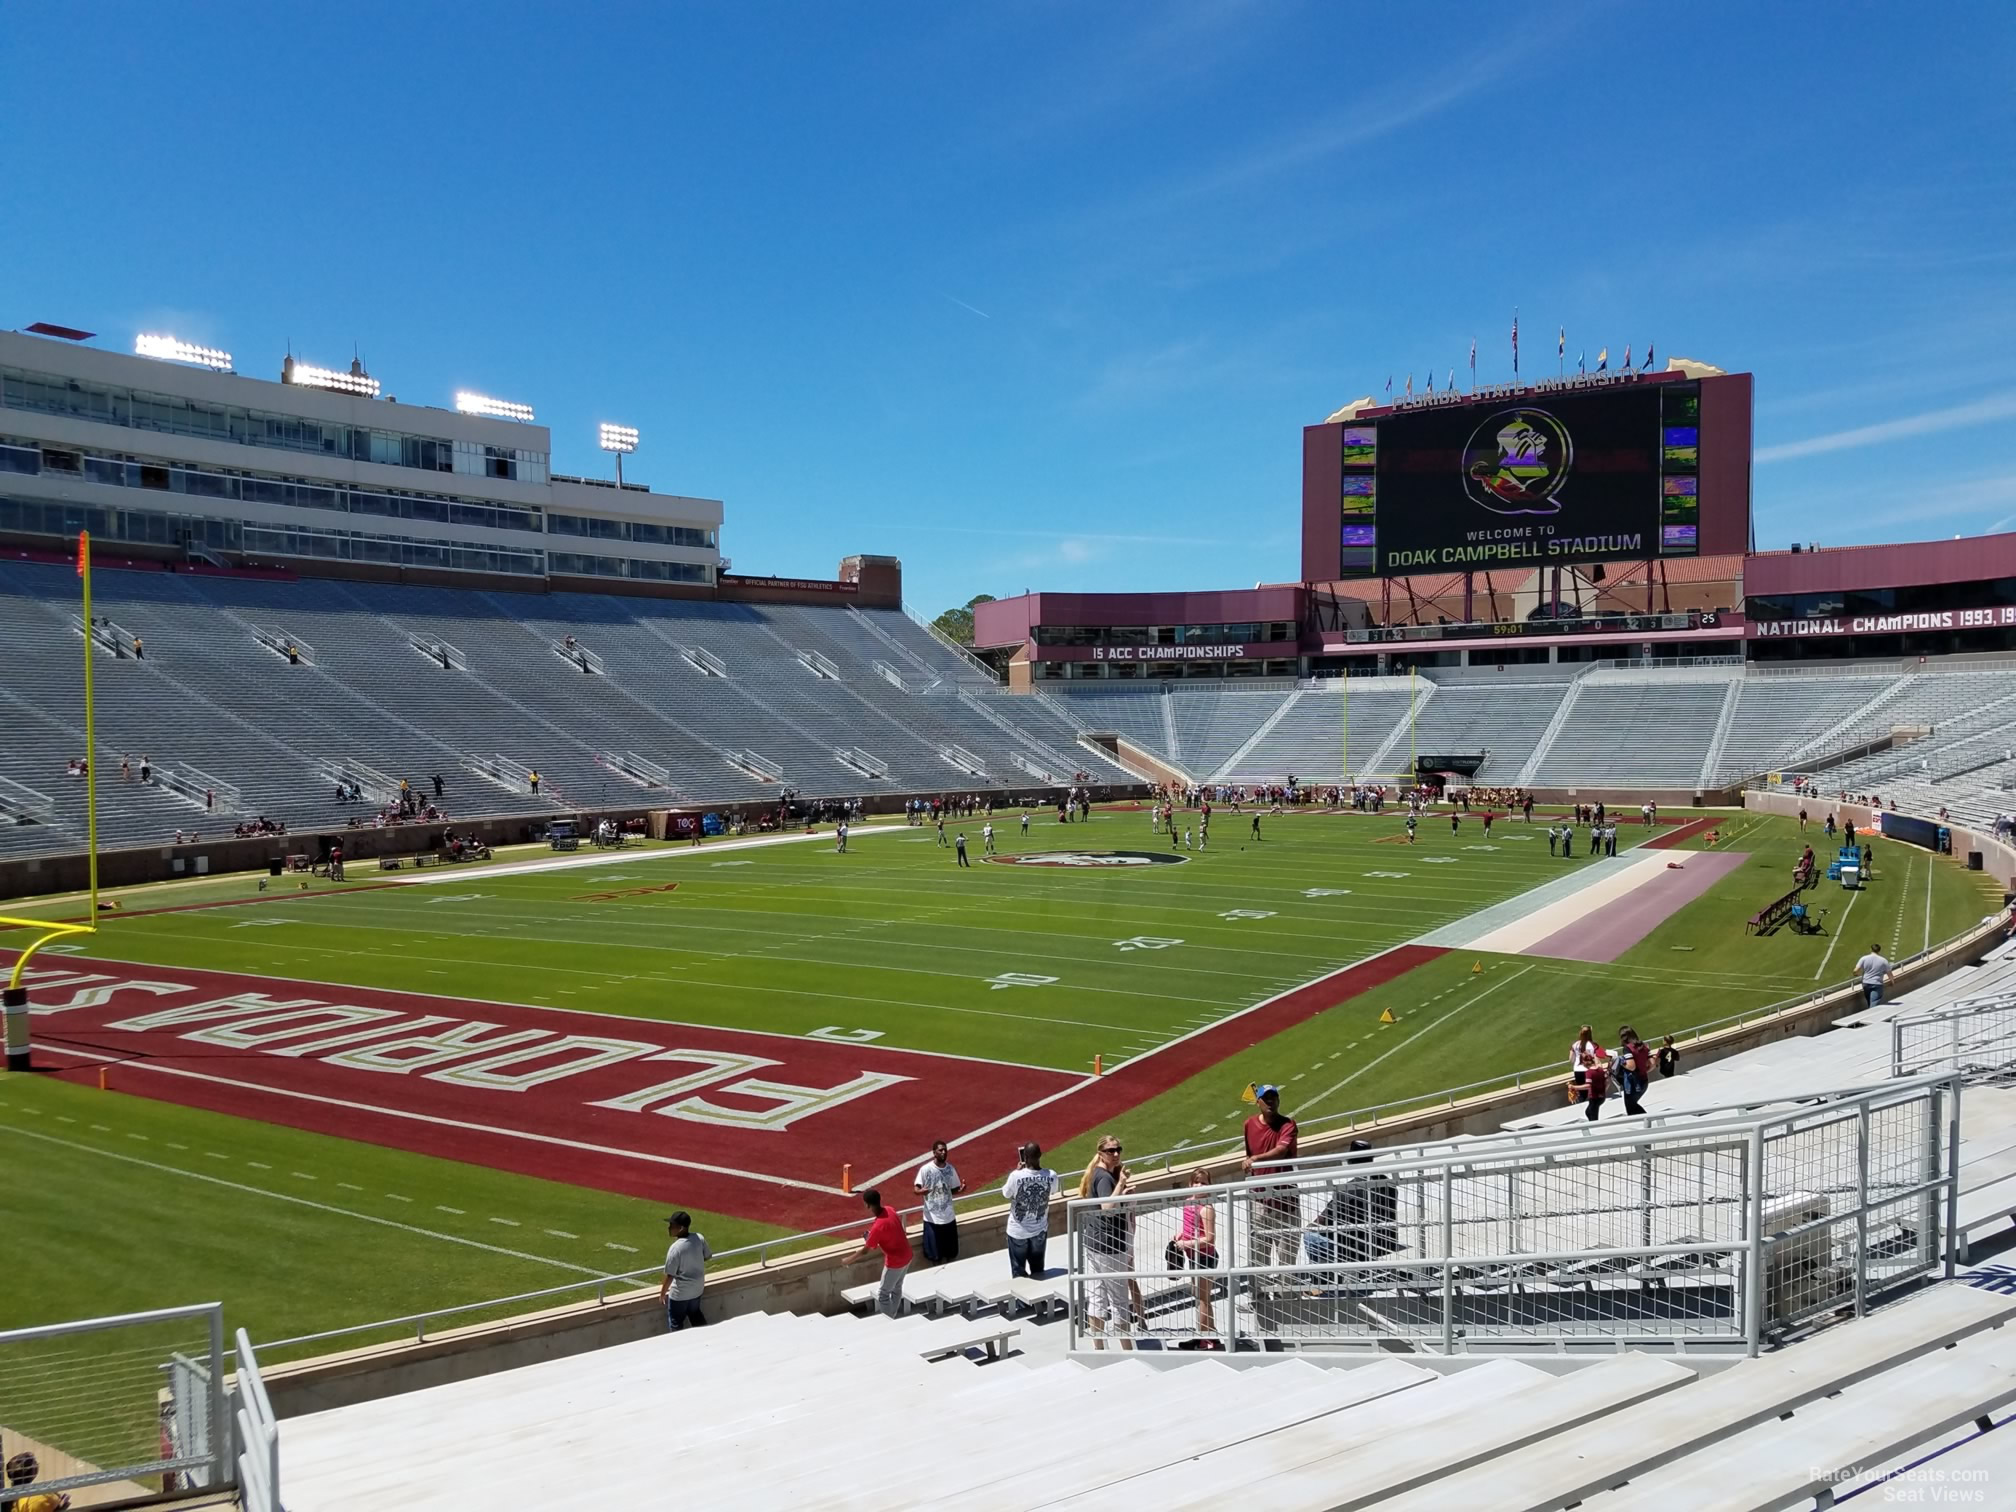 section 16, row 25 seat view  - doak campbell stadium